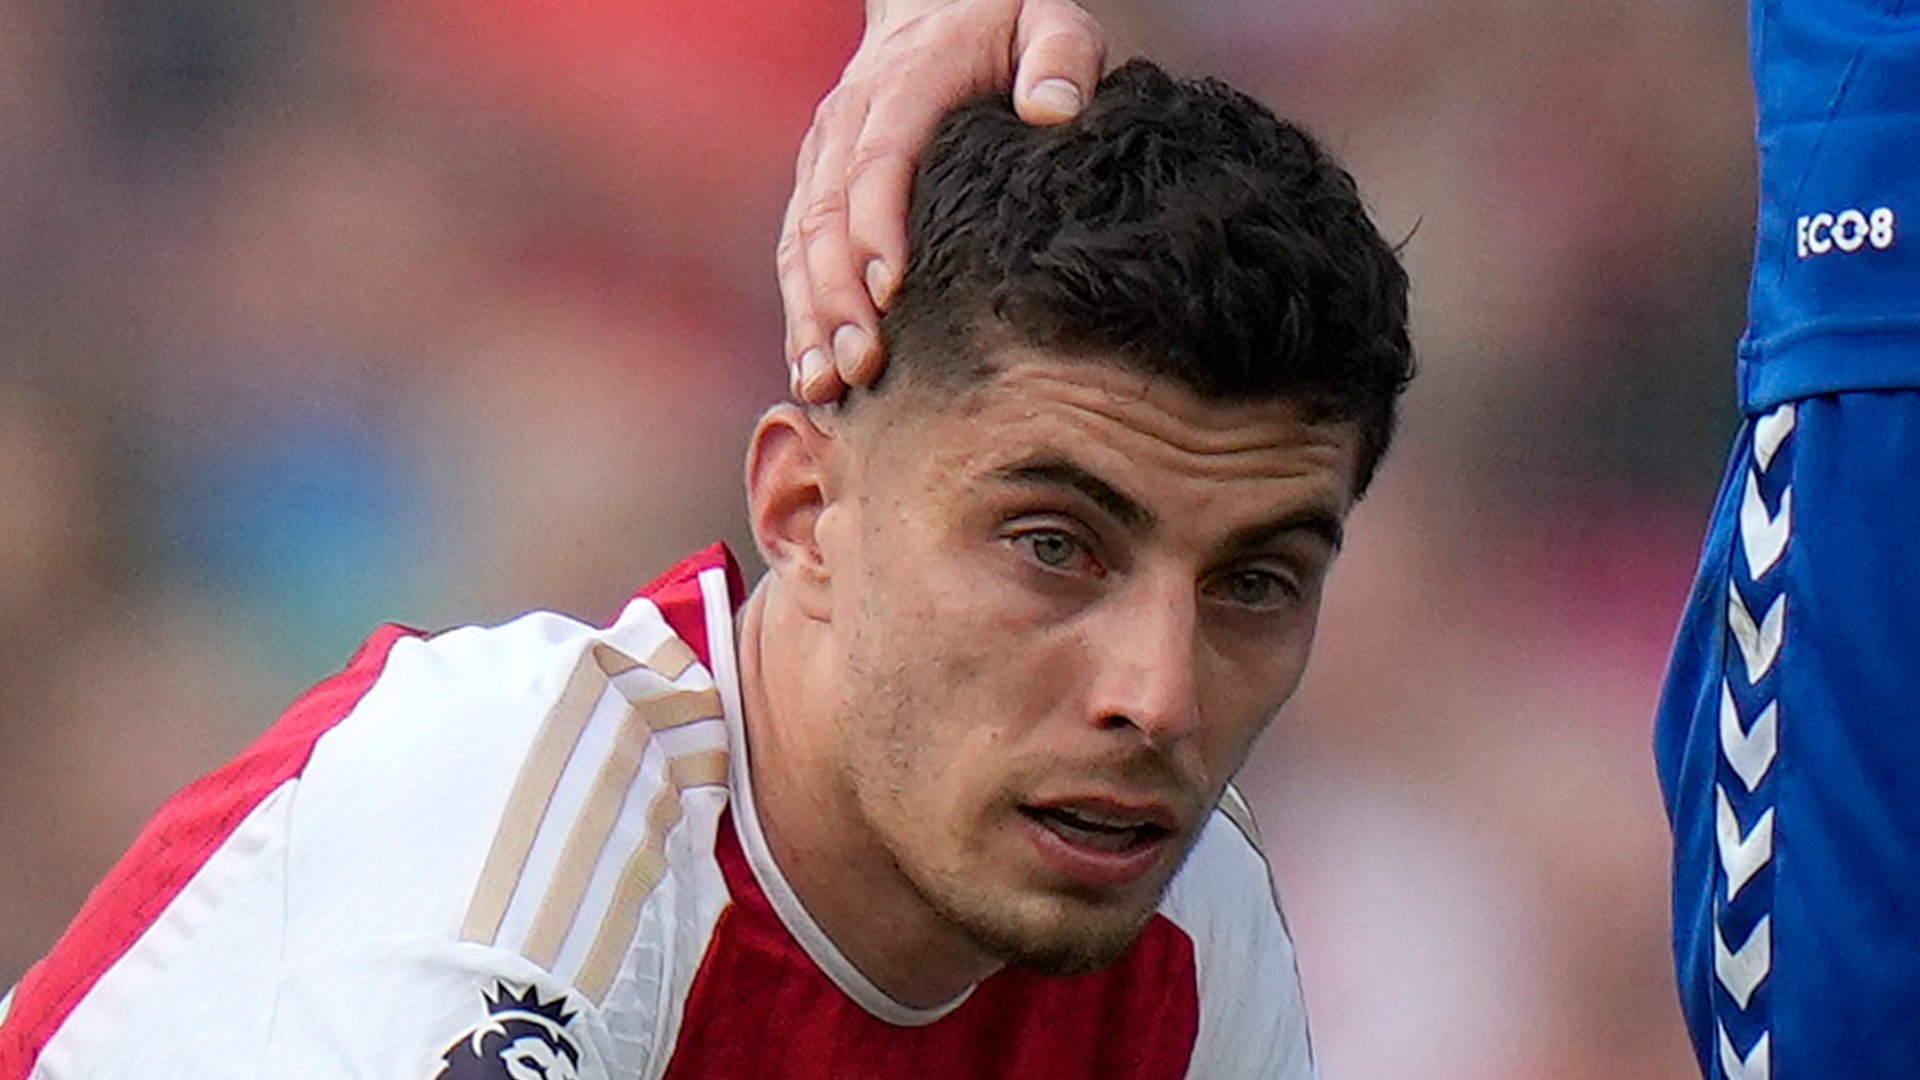 Kai Havertz breaks down in tears after Arsenal fall agonisingly short of Premier League title on final day of season [Video]